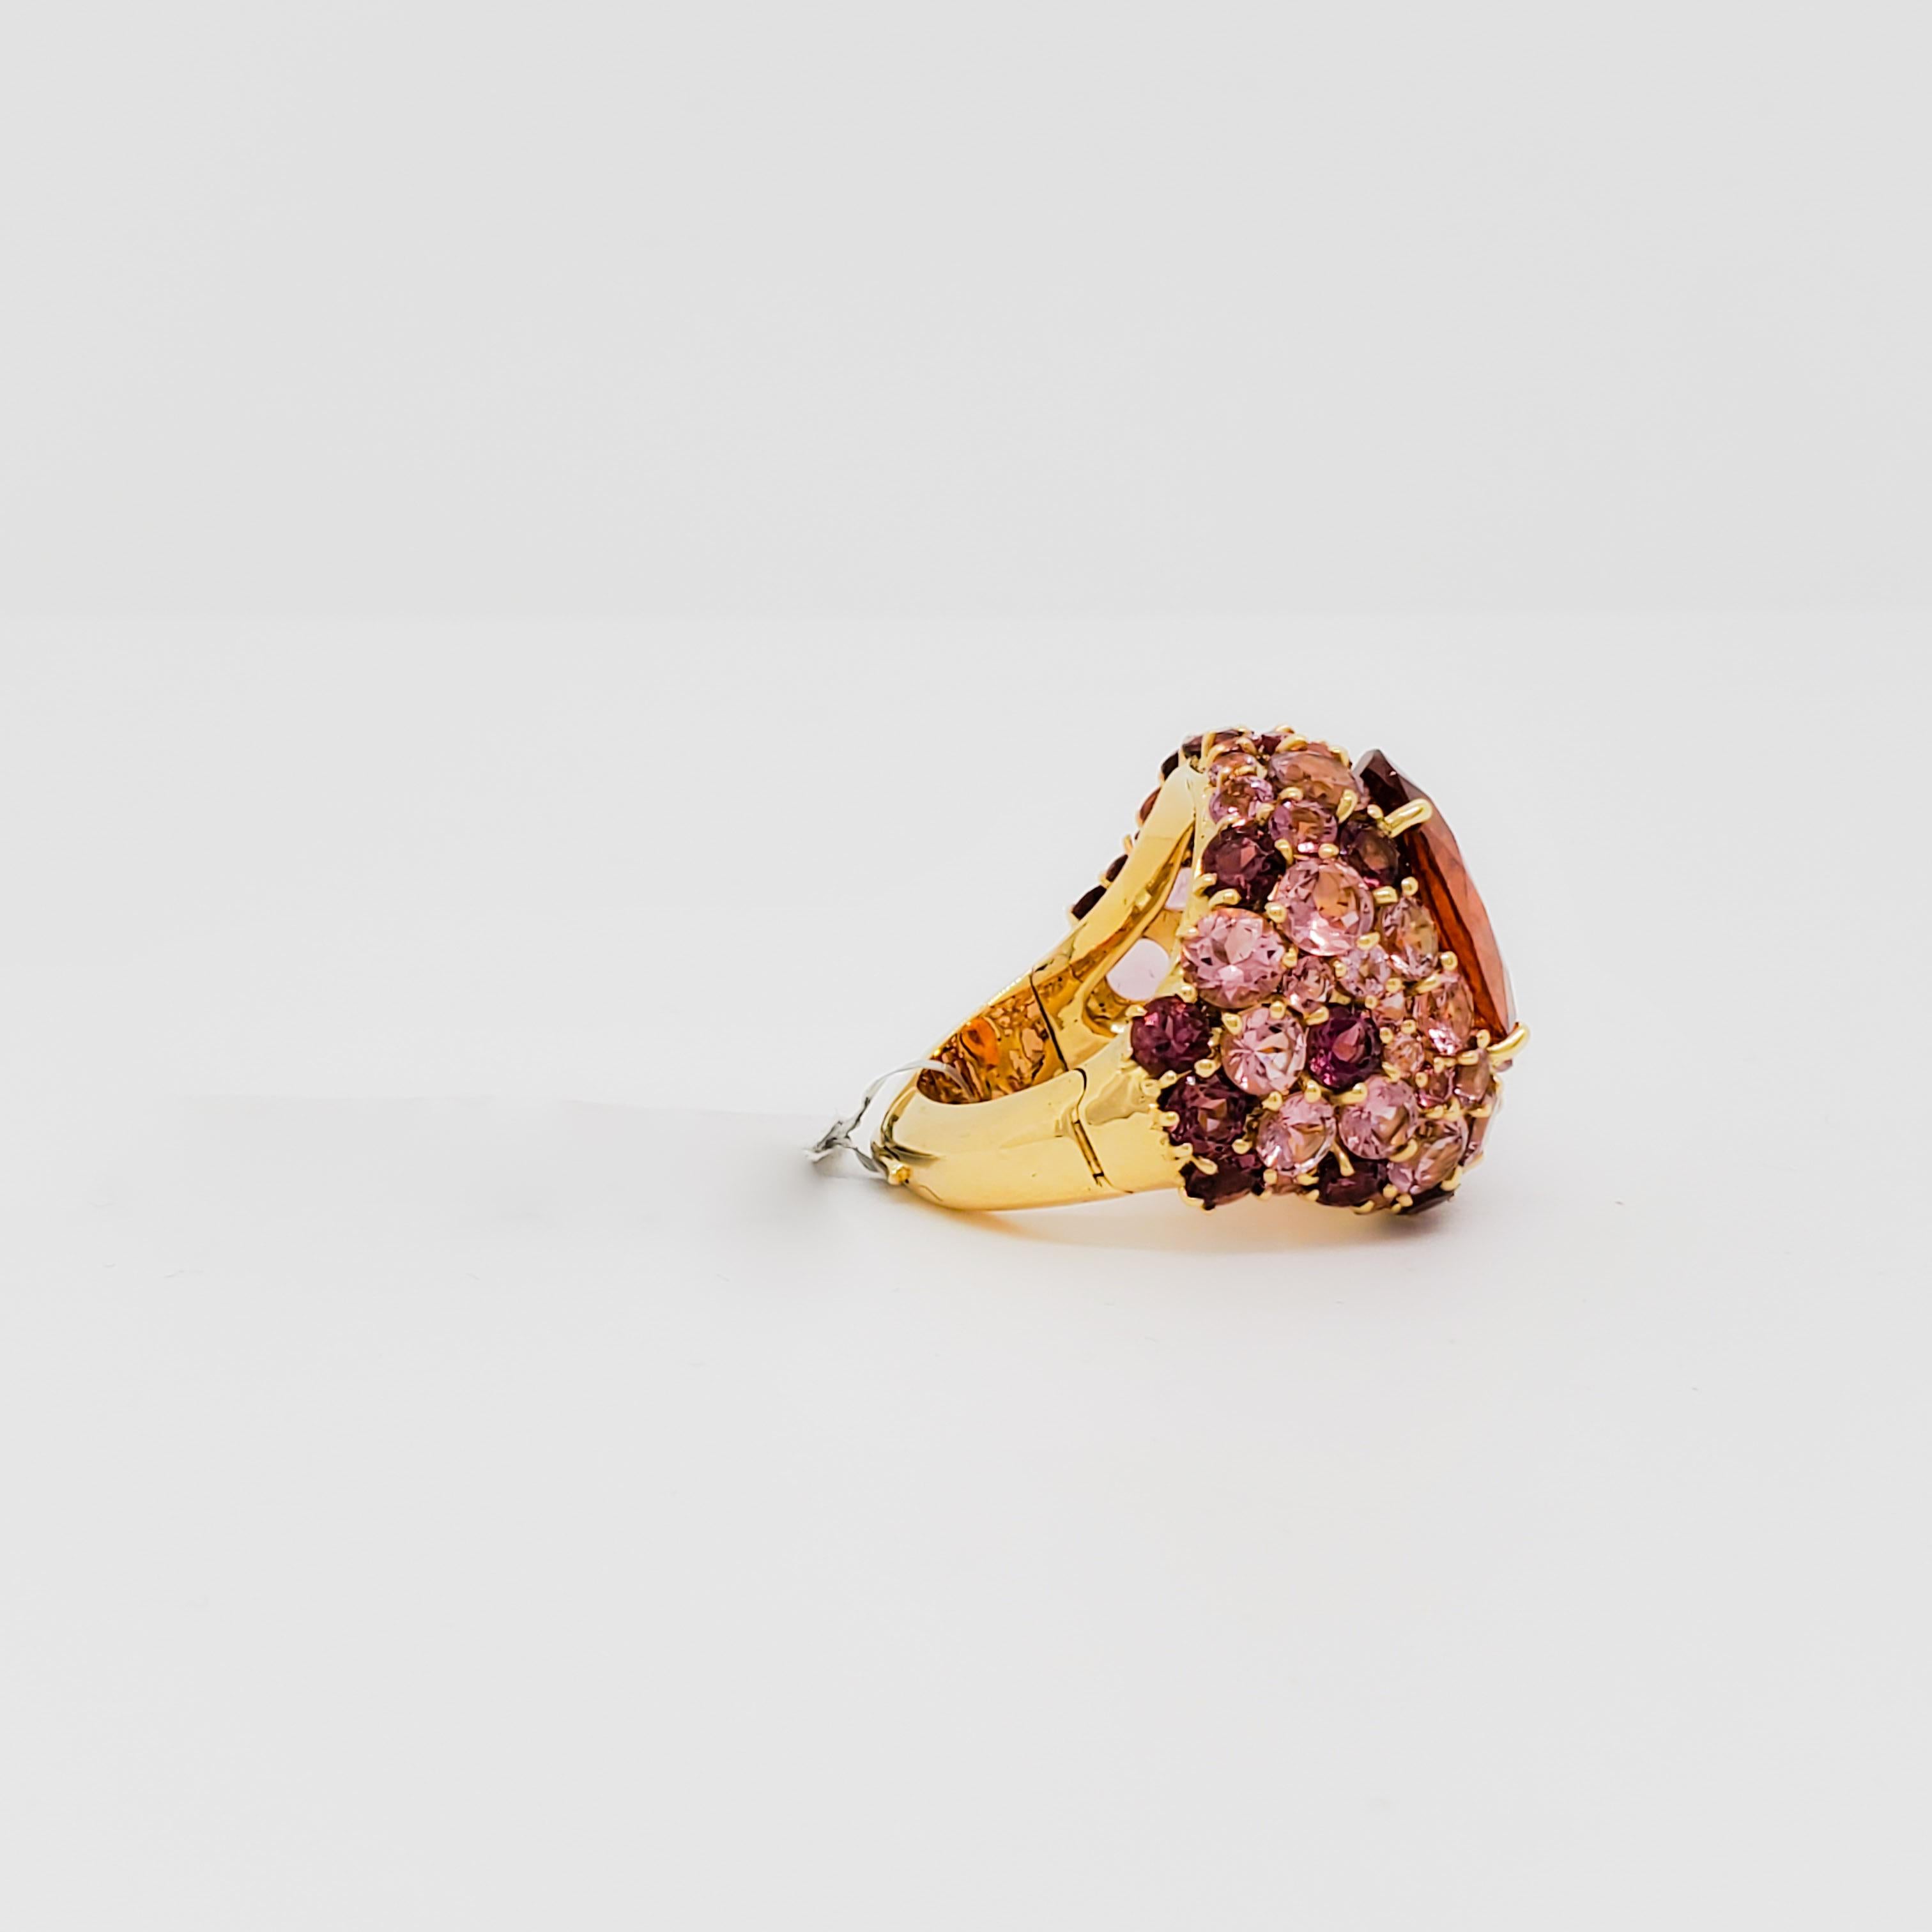 Estate Orange Sapphire and Pink Tourmaline Cocktail Ring in 18k Yellow Gold 1